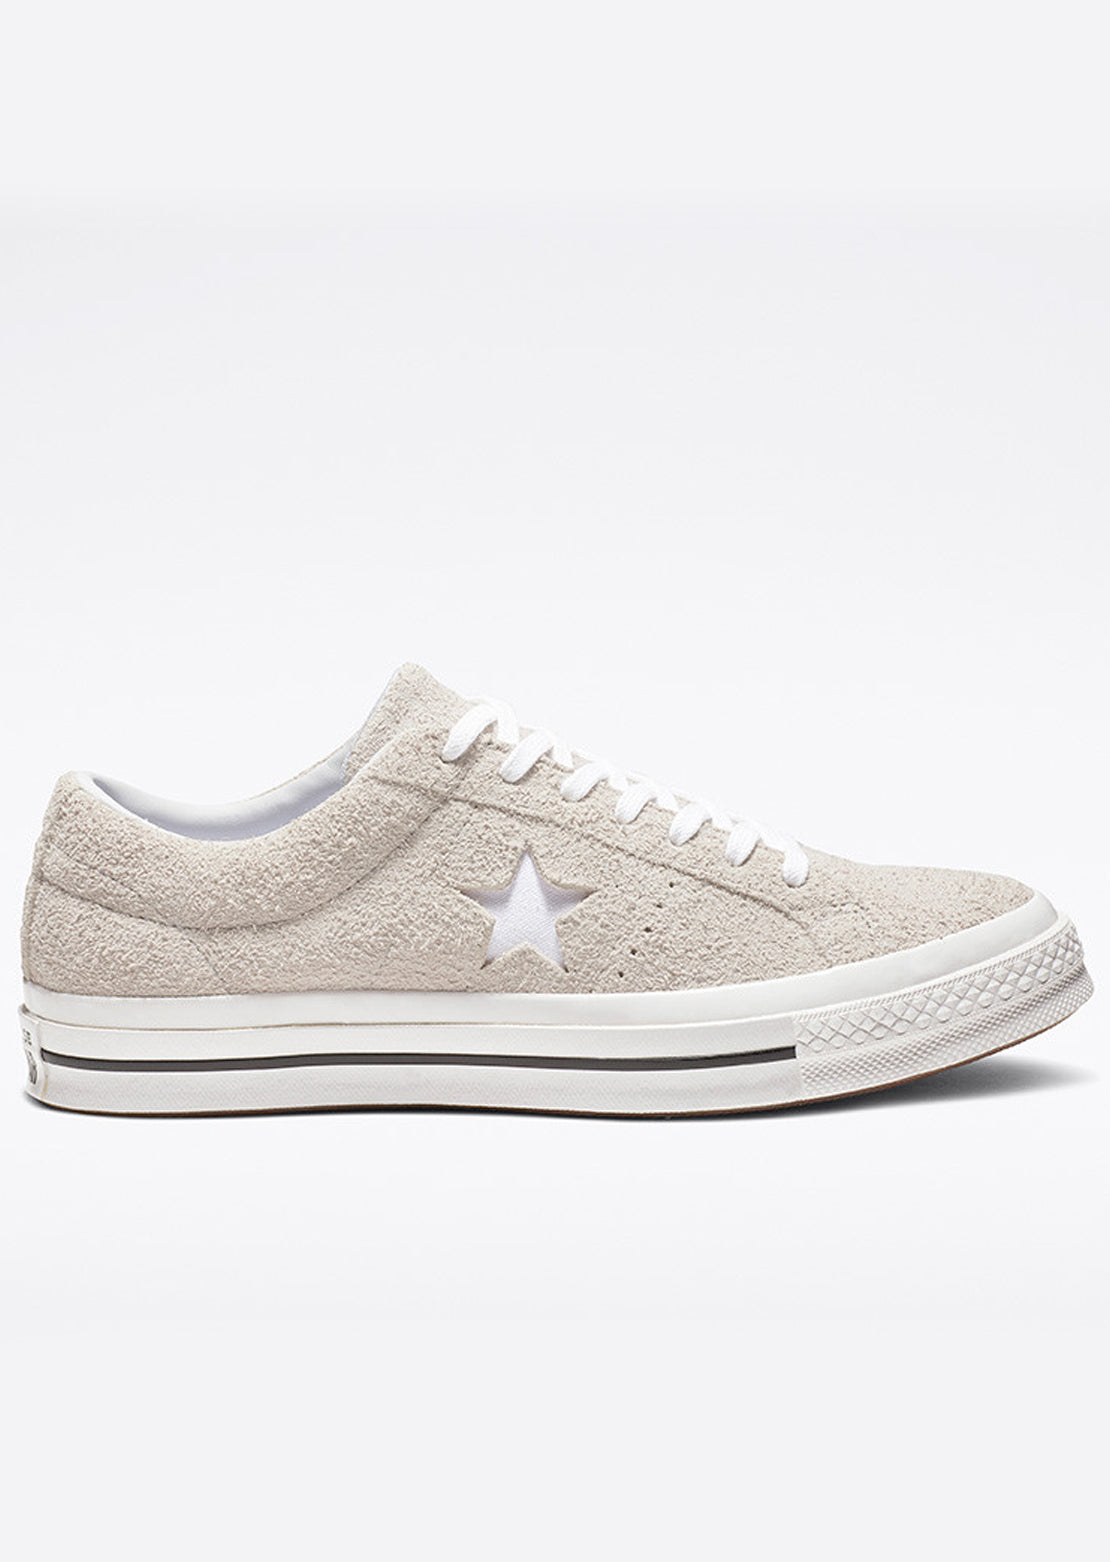 Converse Men’s One Star Low Top Suede OX Shoes White/White/White